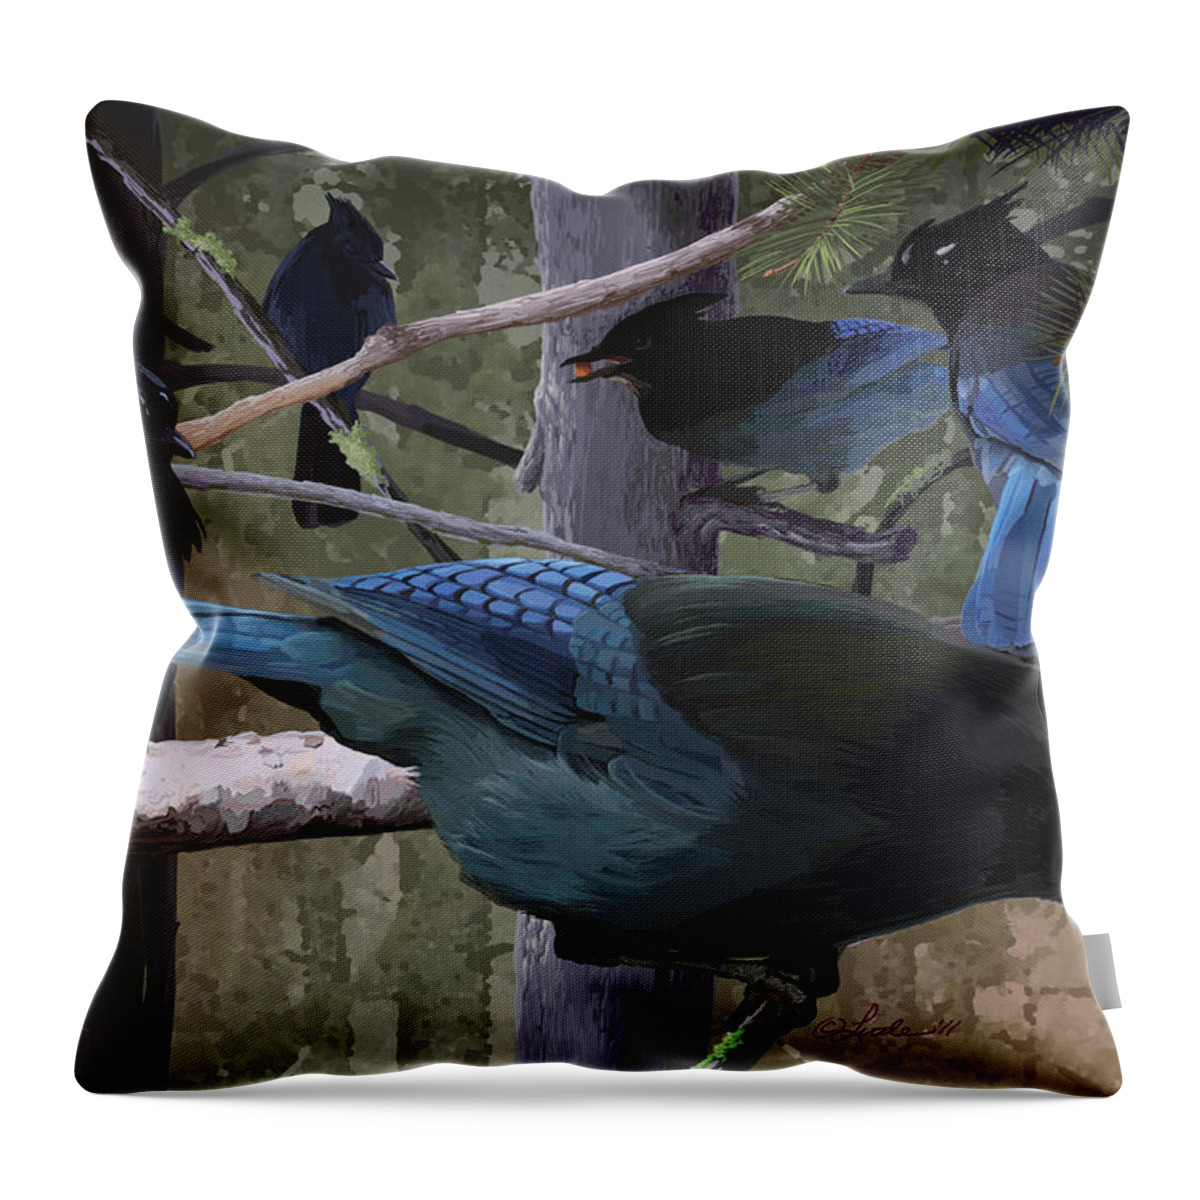 Birds Throw Pillow featuring the painting Steller's Jays by Pam Little